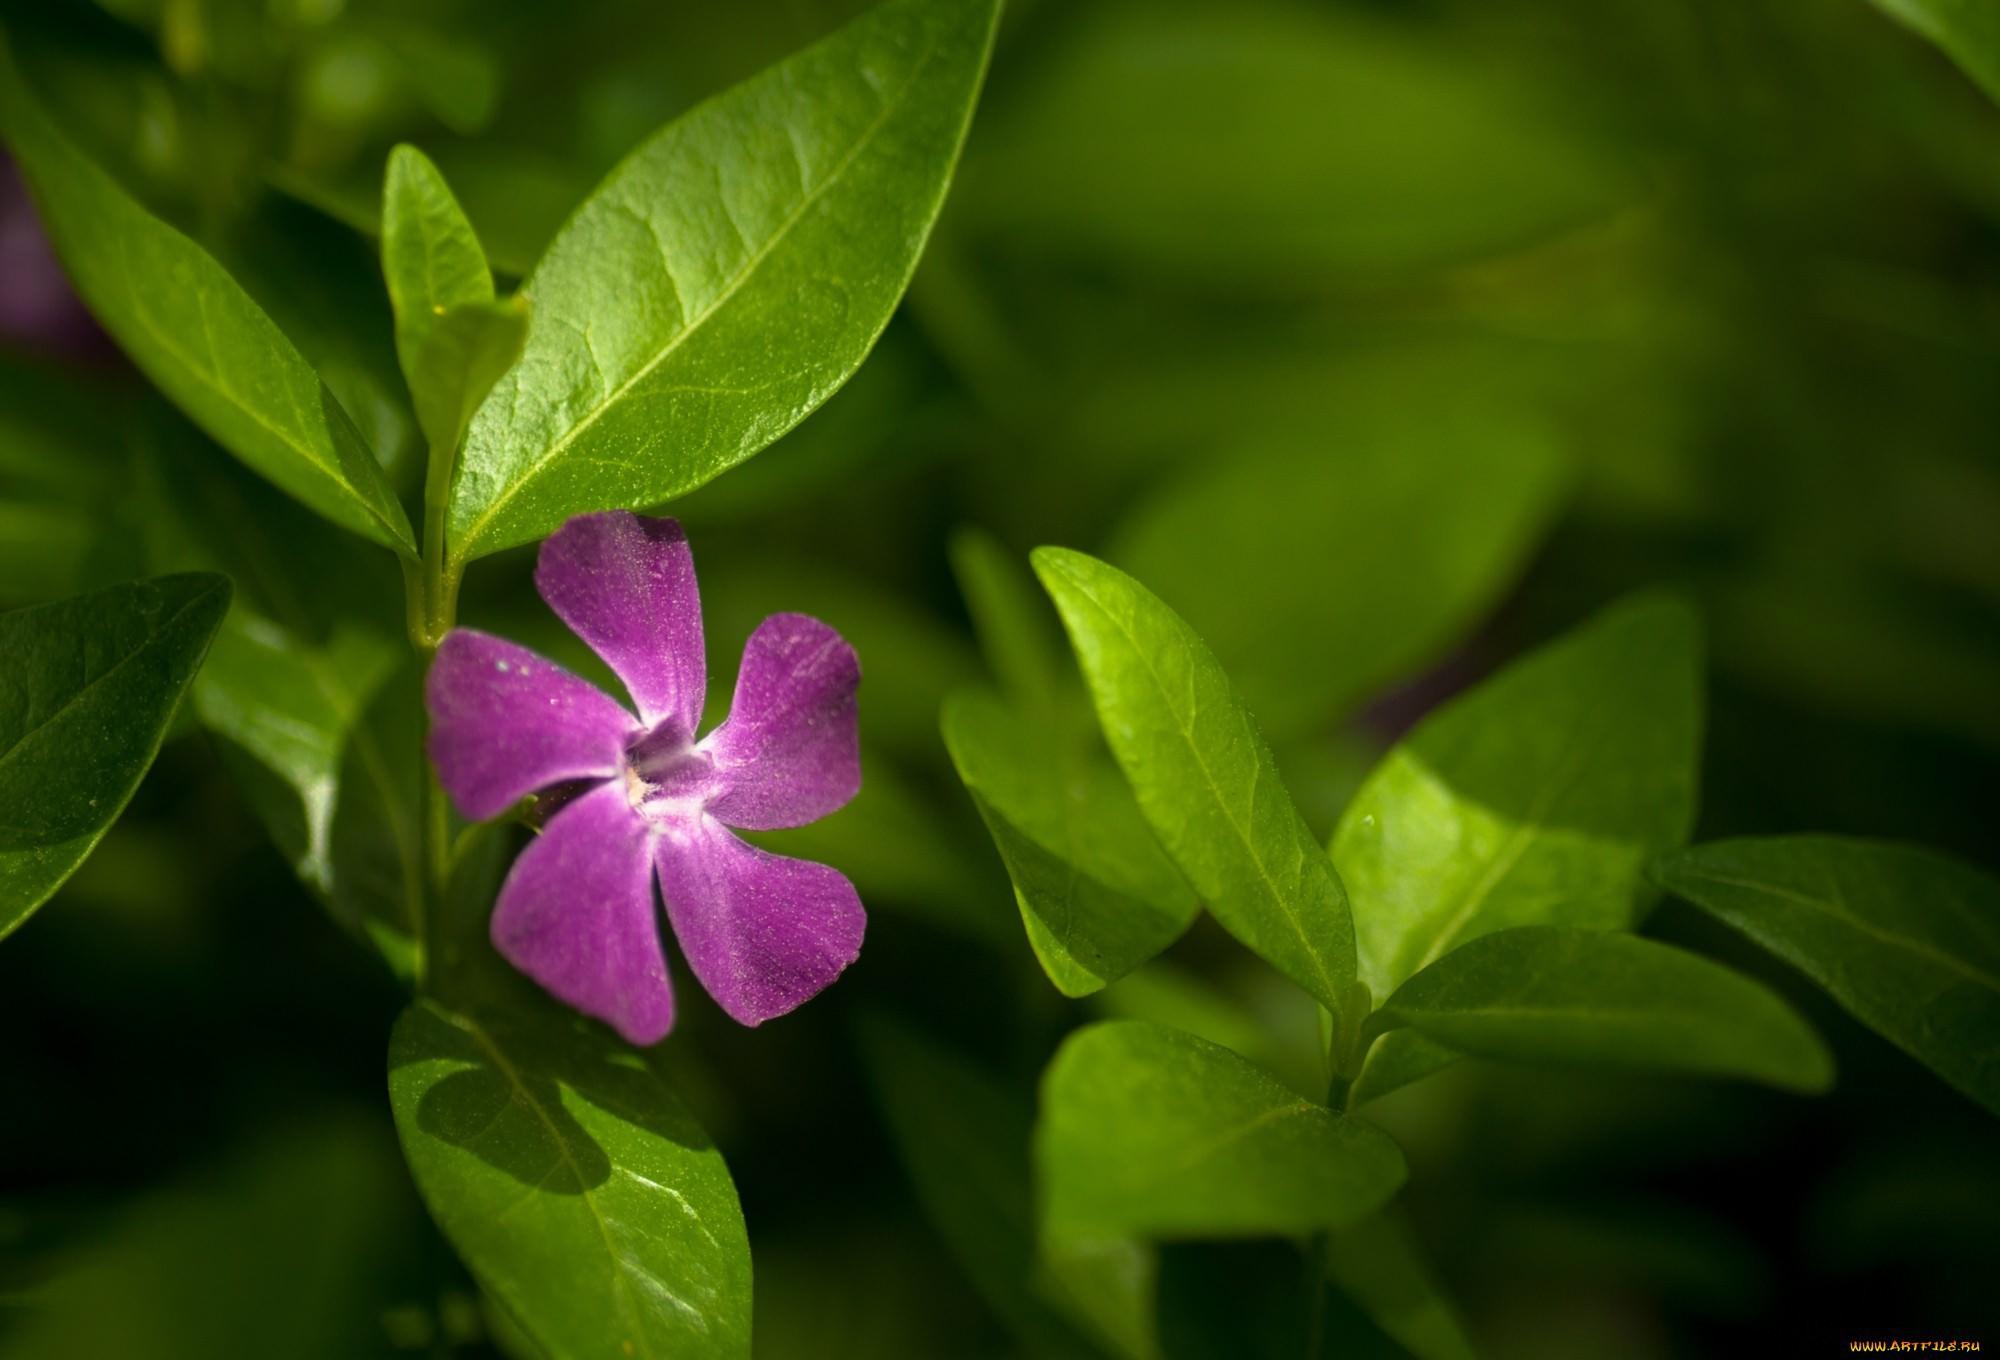 Periwinkle flower growing in the garden wallpapers and image.